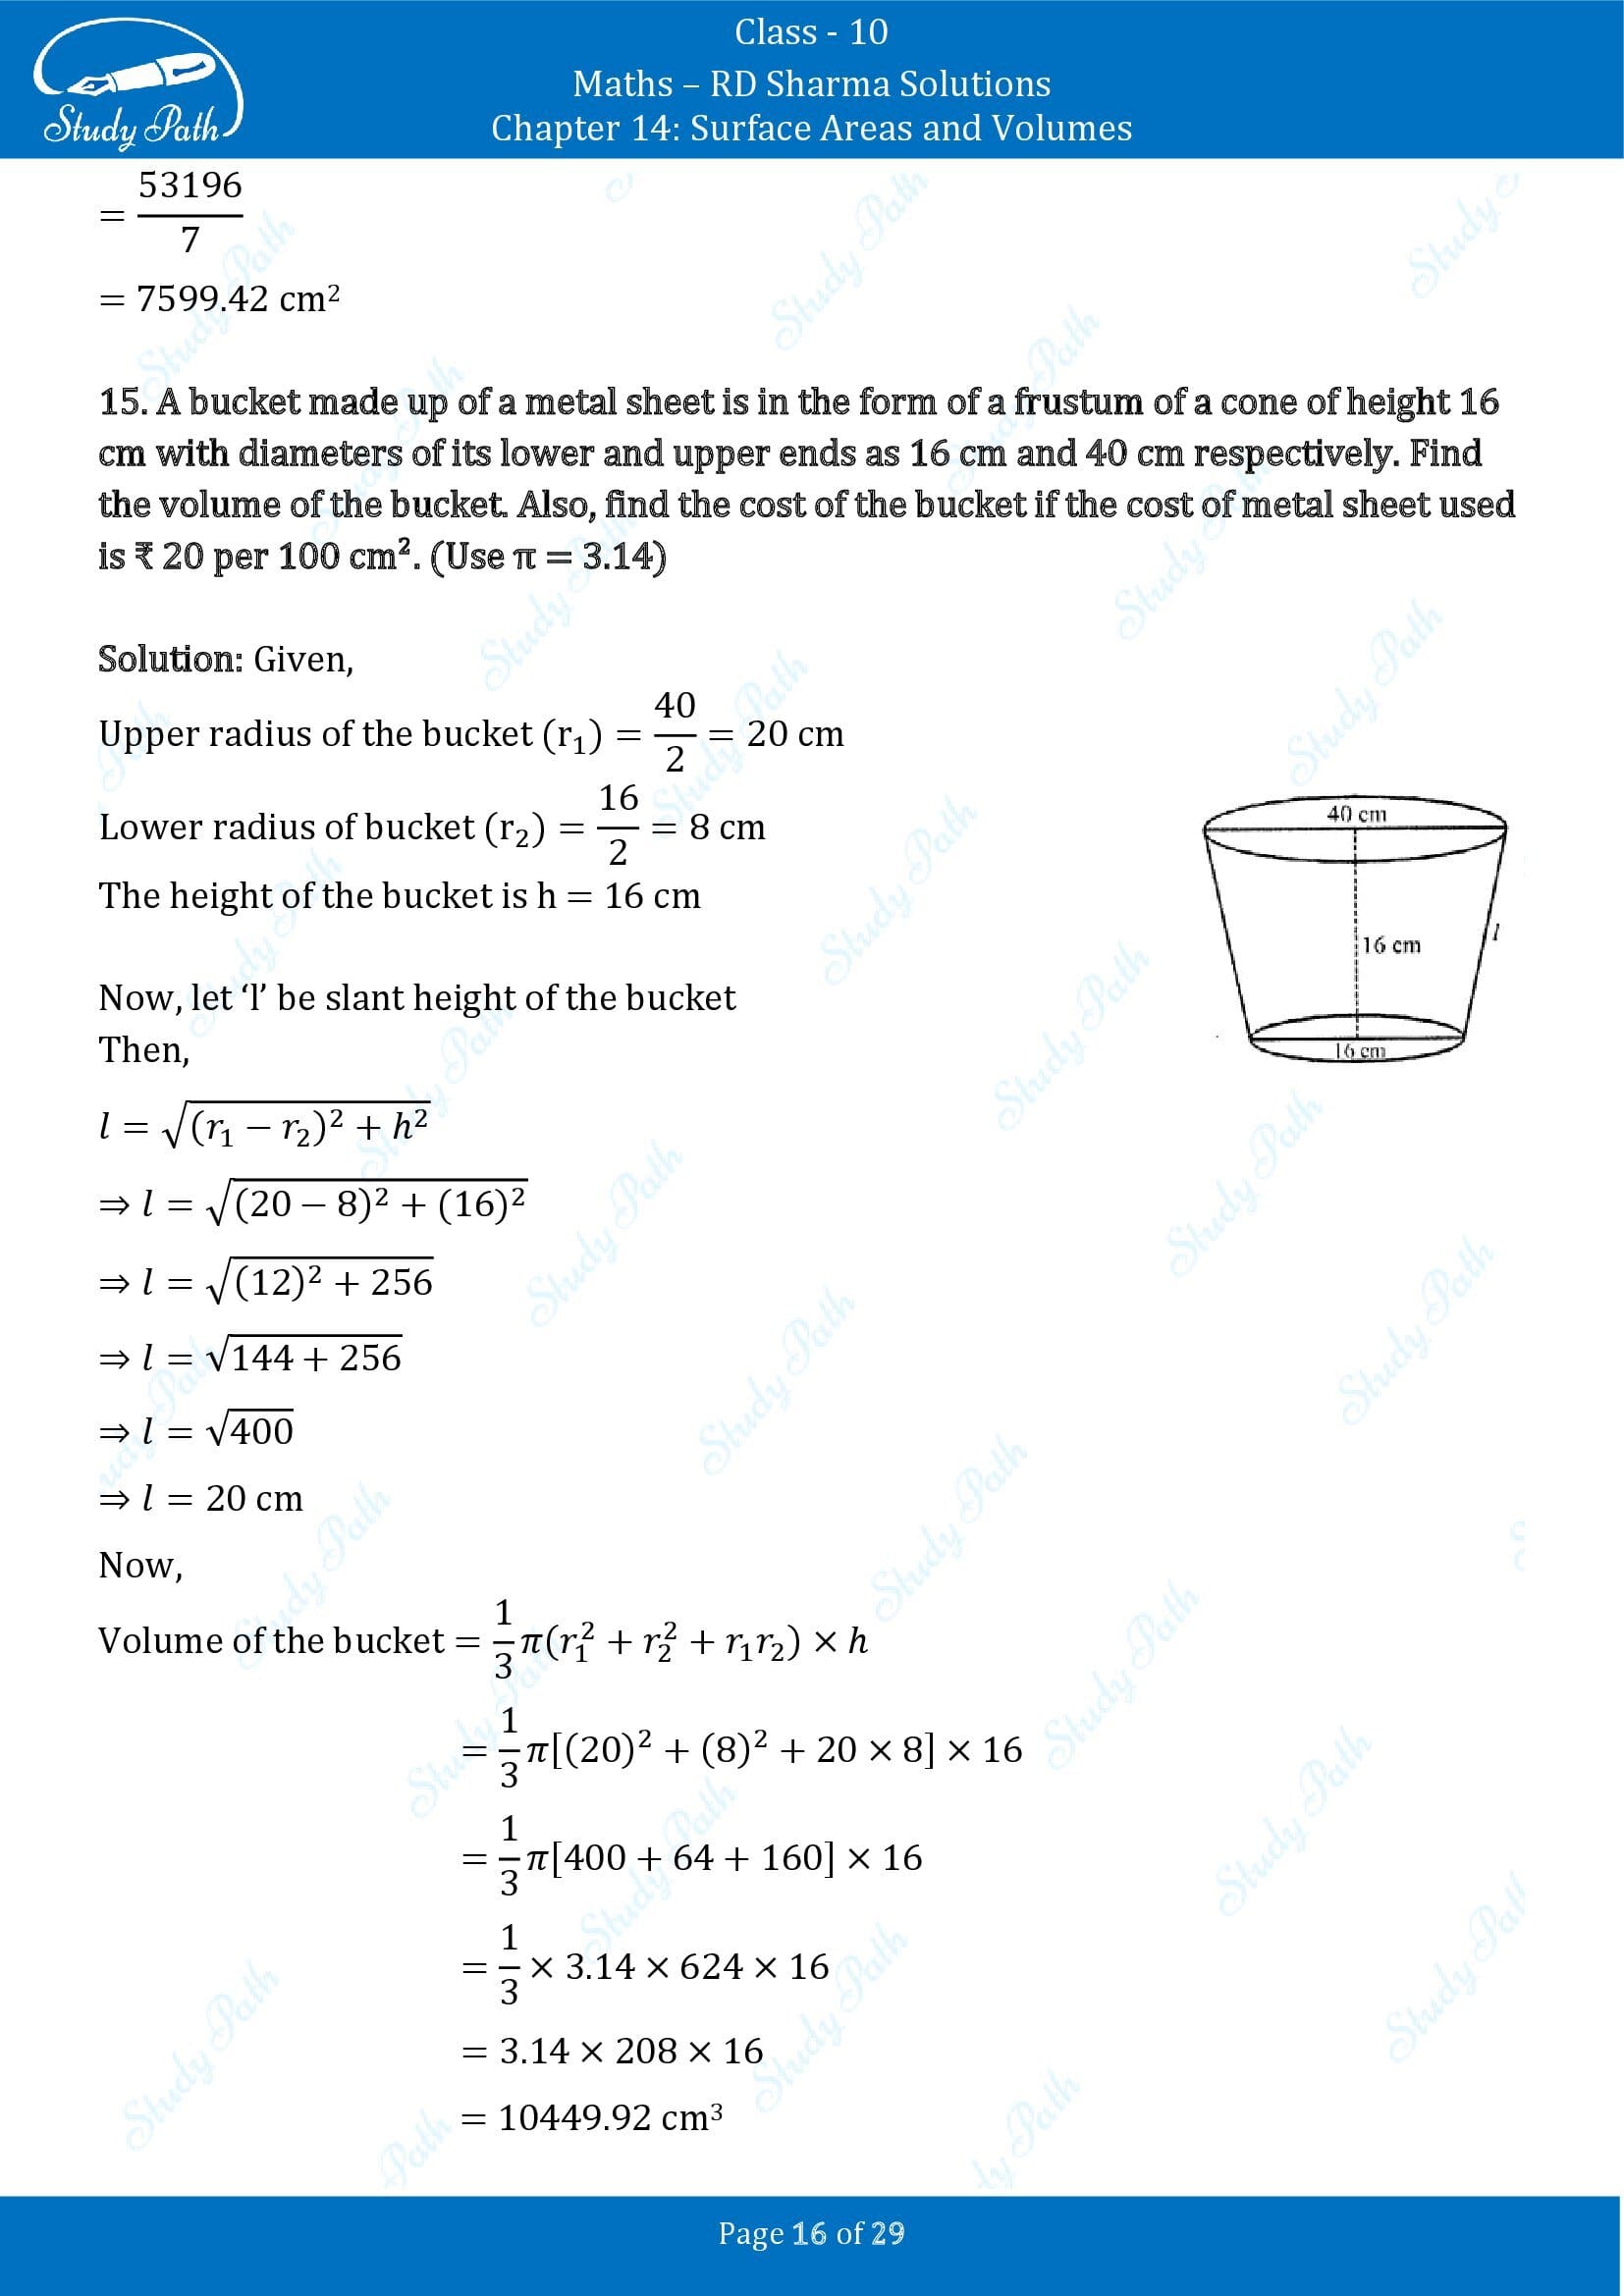 RD Sharma Solutions Class 10 Chapter 14 Surface Areas and Volumes Exercise 14.3 00016